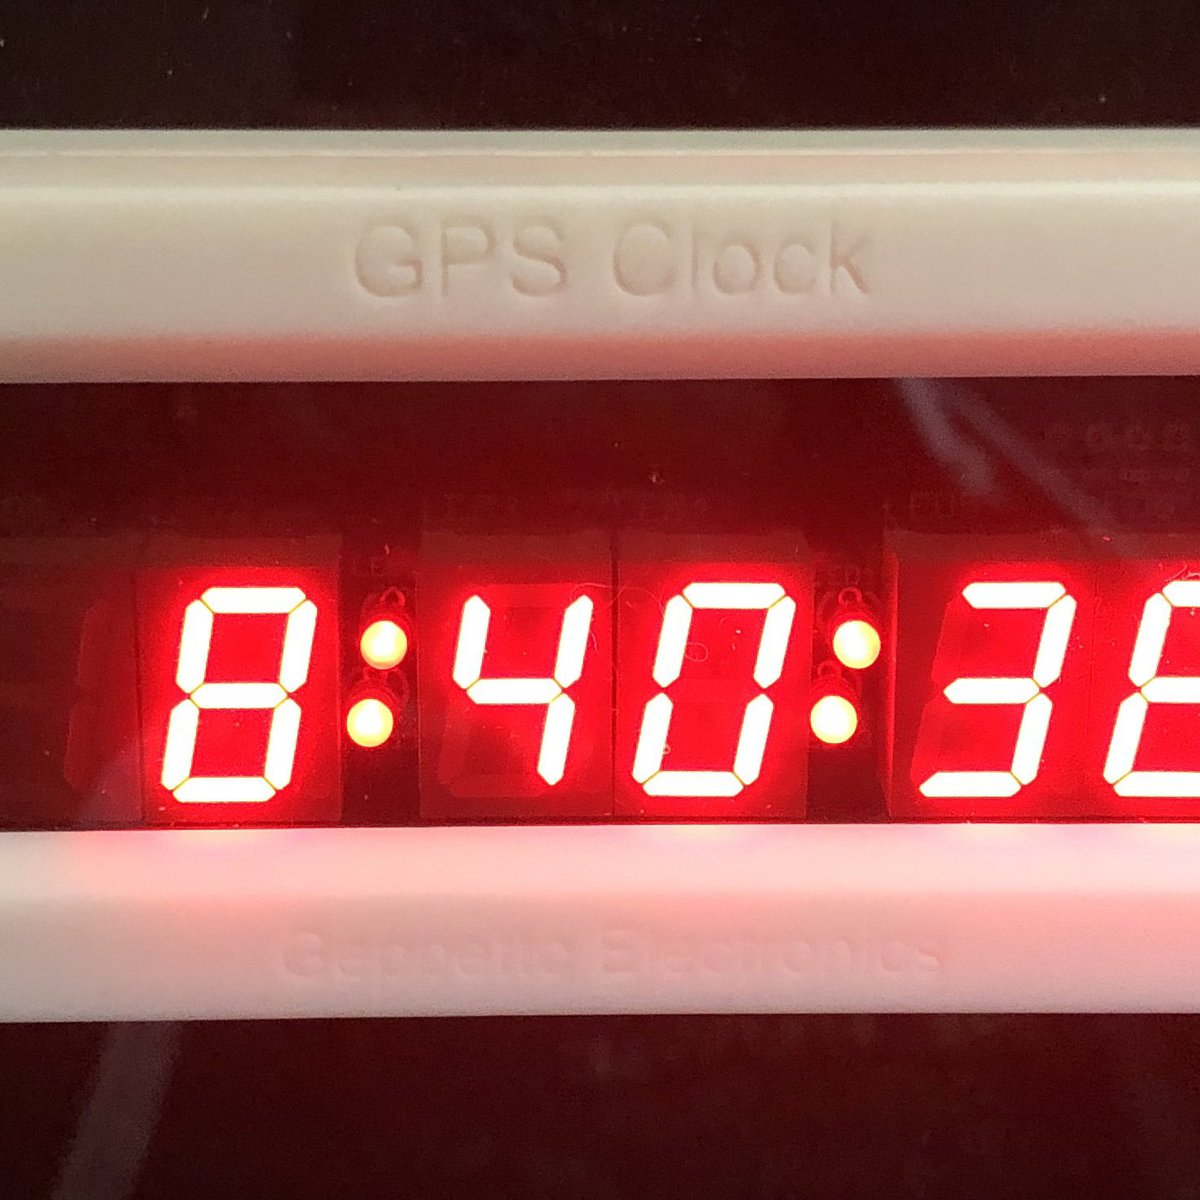 Reaktor sukker stewardesse GPS Clock from Geppetto Electronics on Tindie